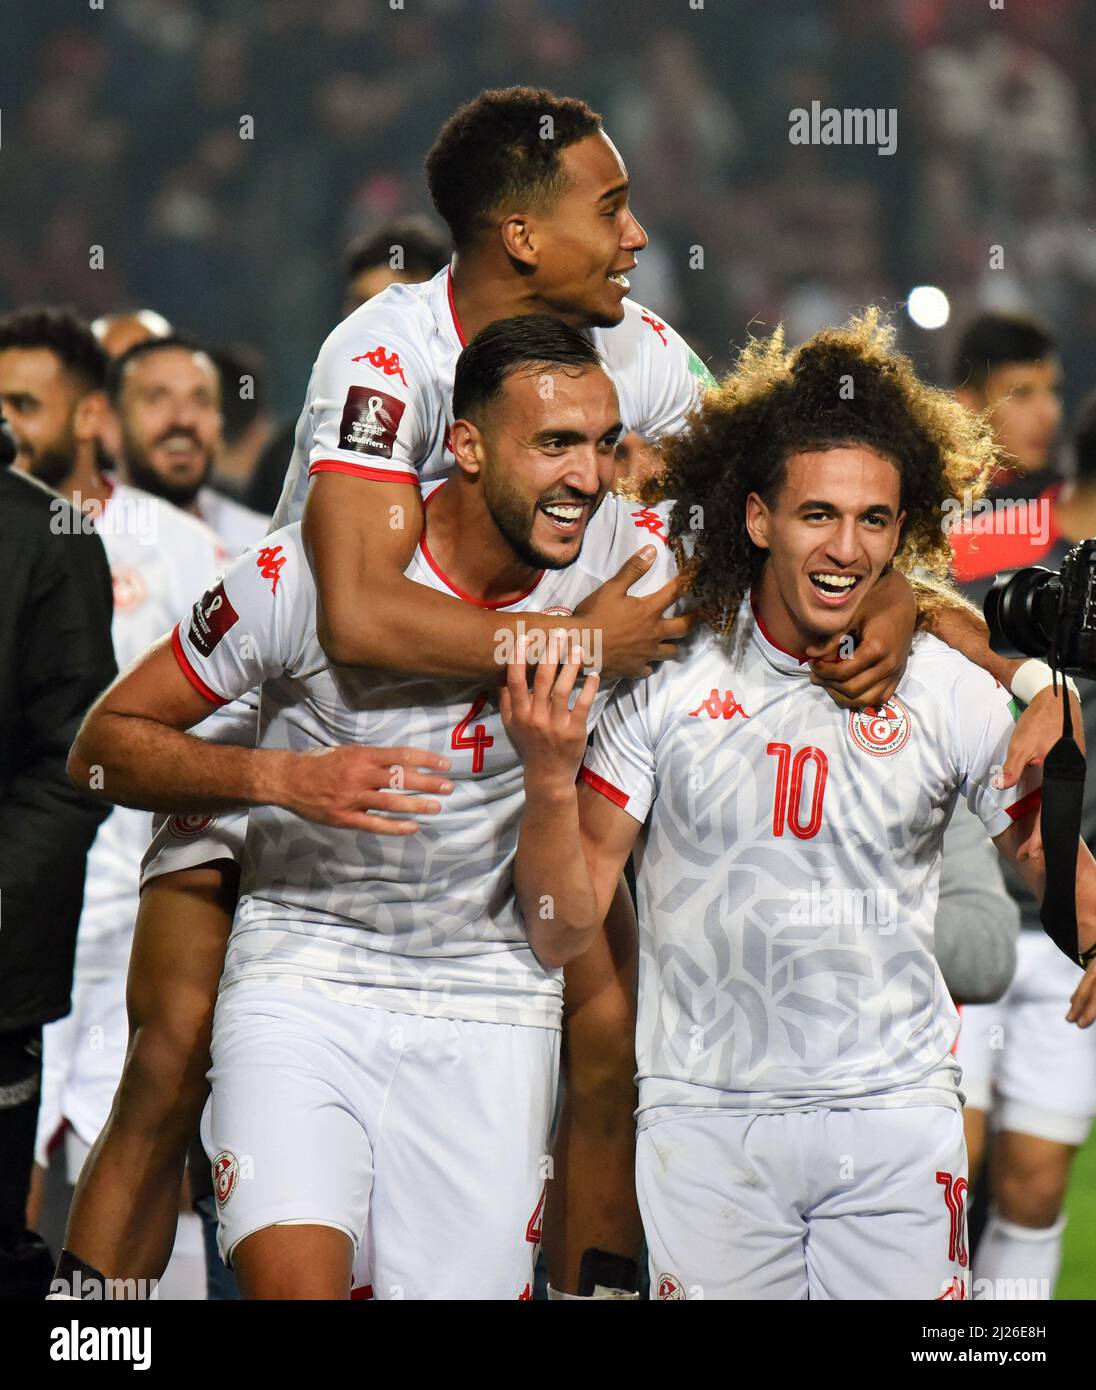 Tunis, Tunisia. 29th Mar, 2022. Tunisia's players celebrate qualifying to  the 2022 Qatar World Cup during the second leg of the 2022 Qatar World Cup  African Qualifiers football match between Tunisia and